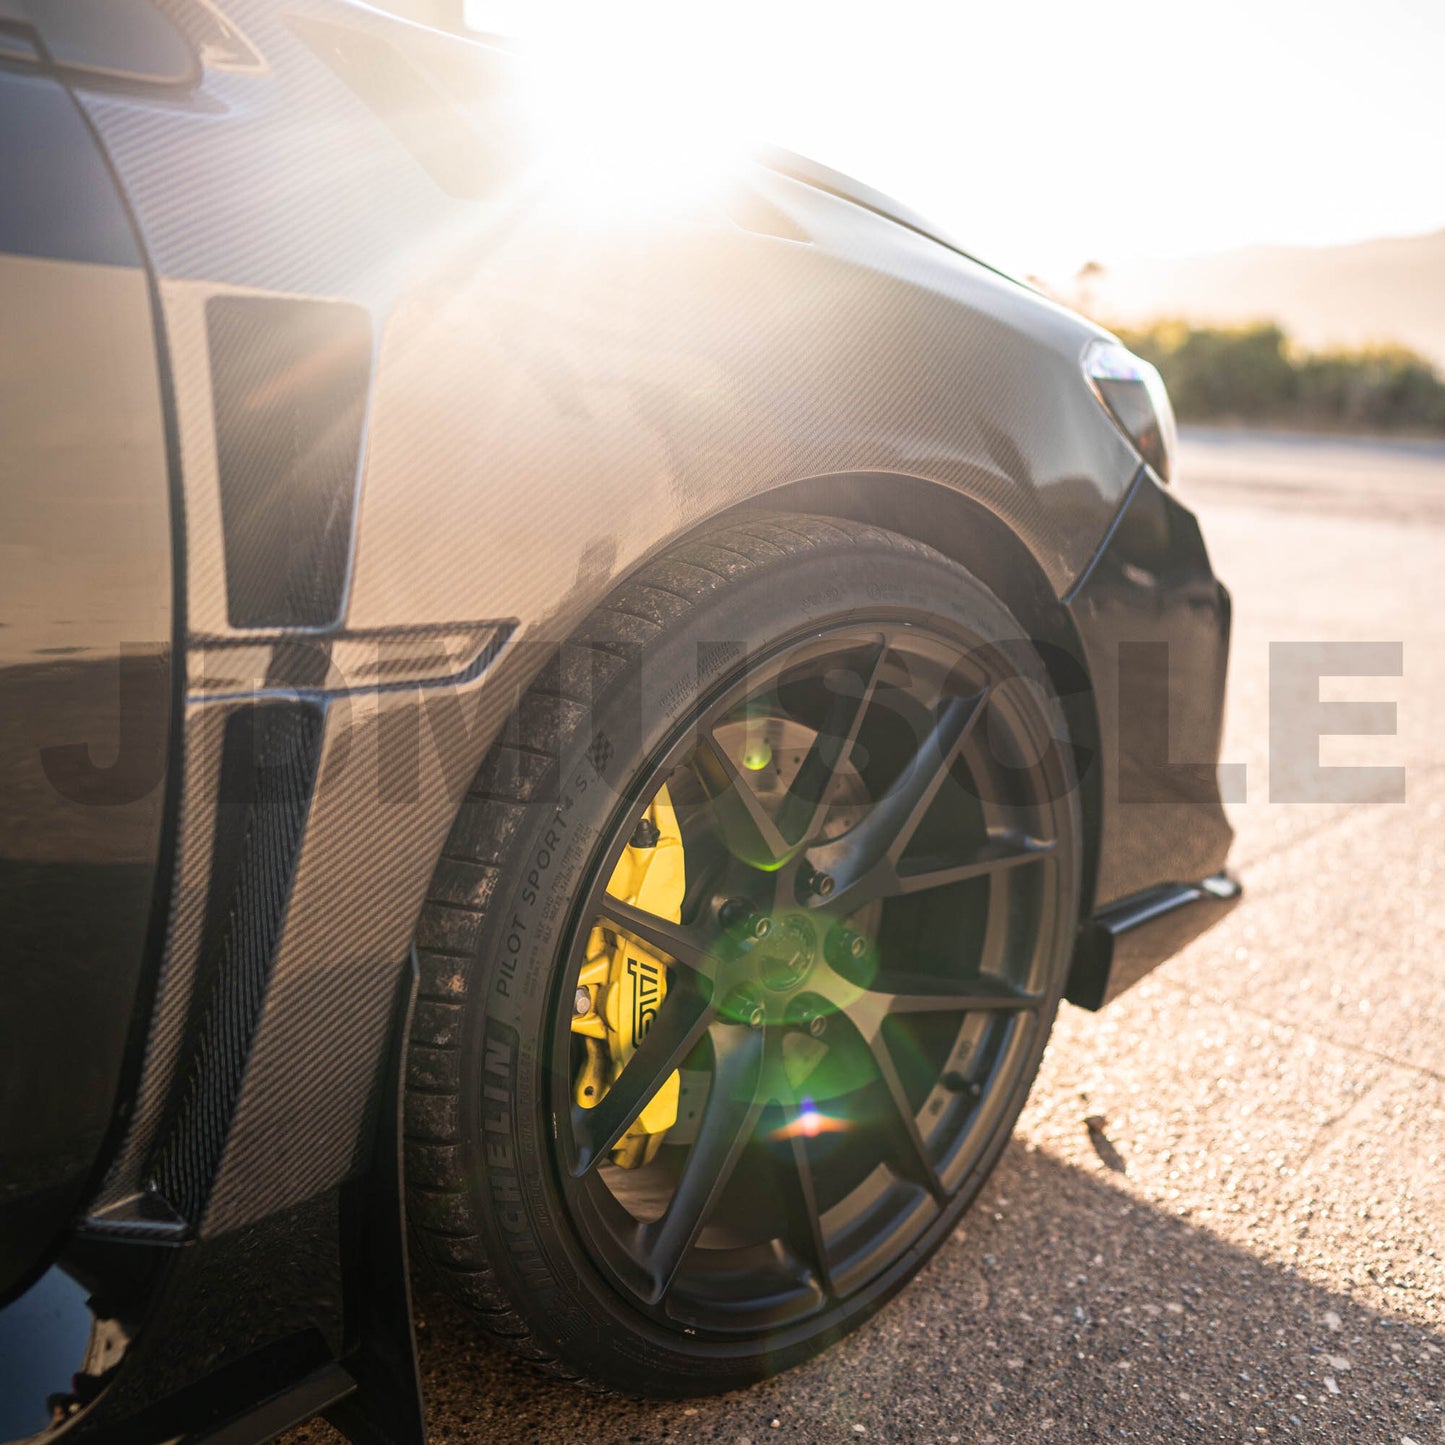 JDMuscle Tanso Carbon Fiber/FRP Vented Fenders for 2015+WRX/STI-Fenders-JDMuscle-JDMuscle